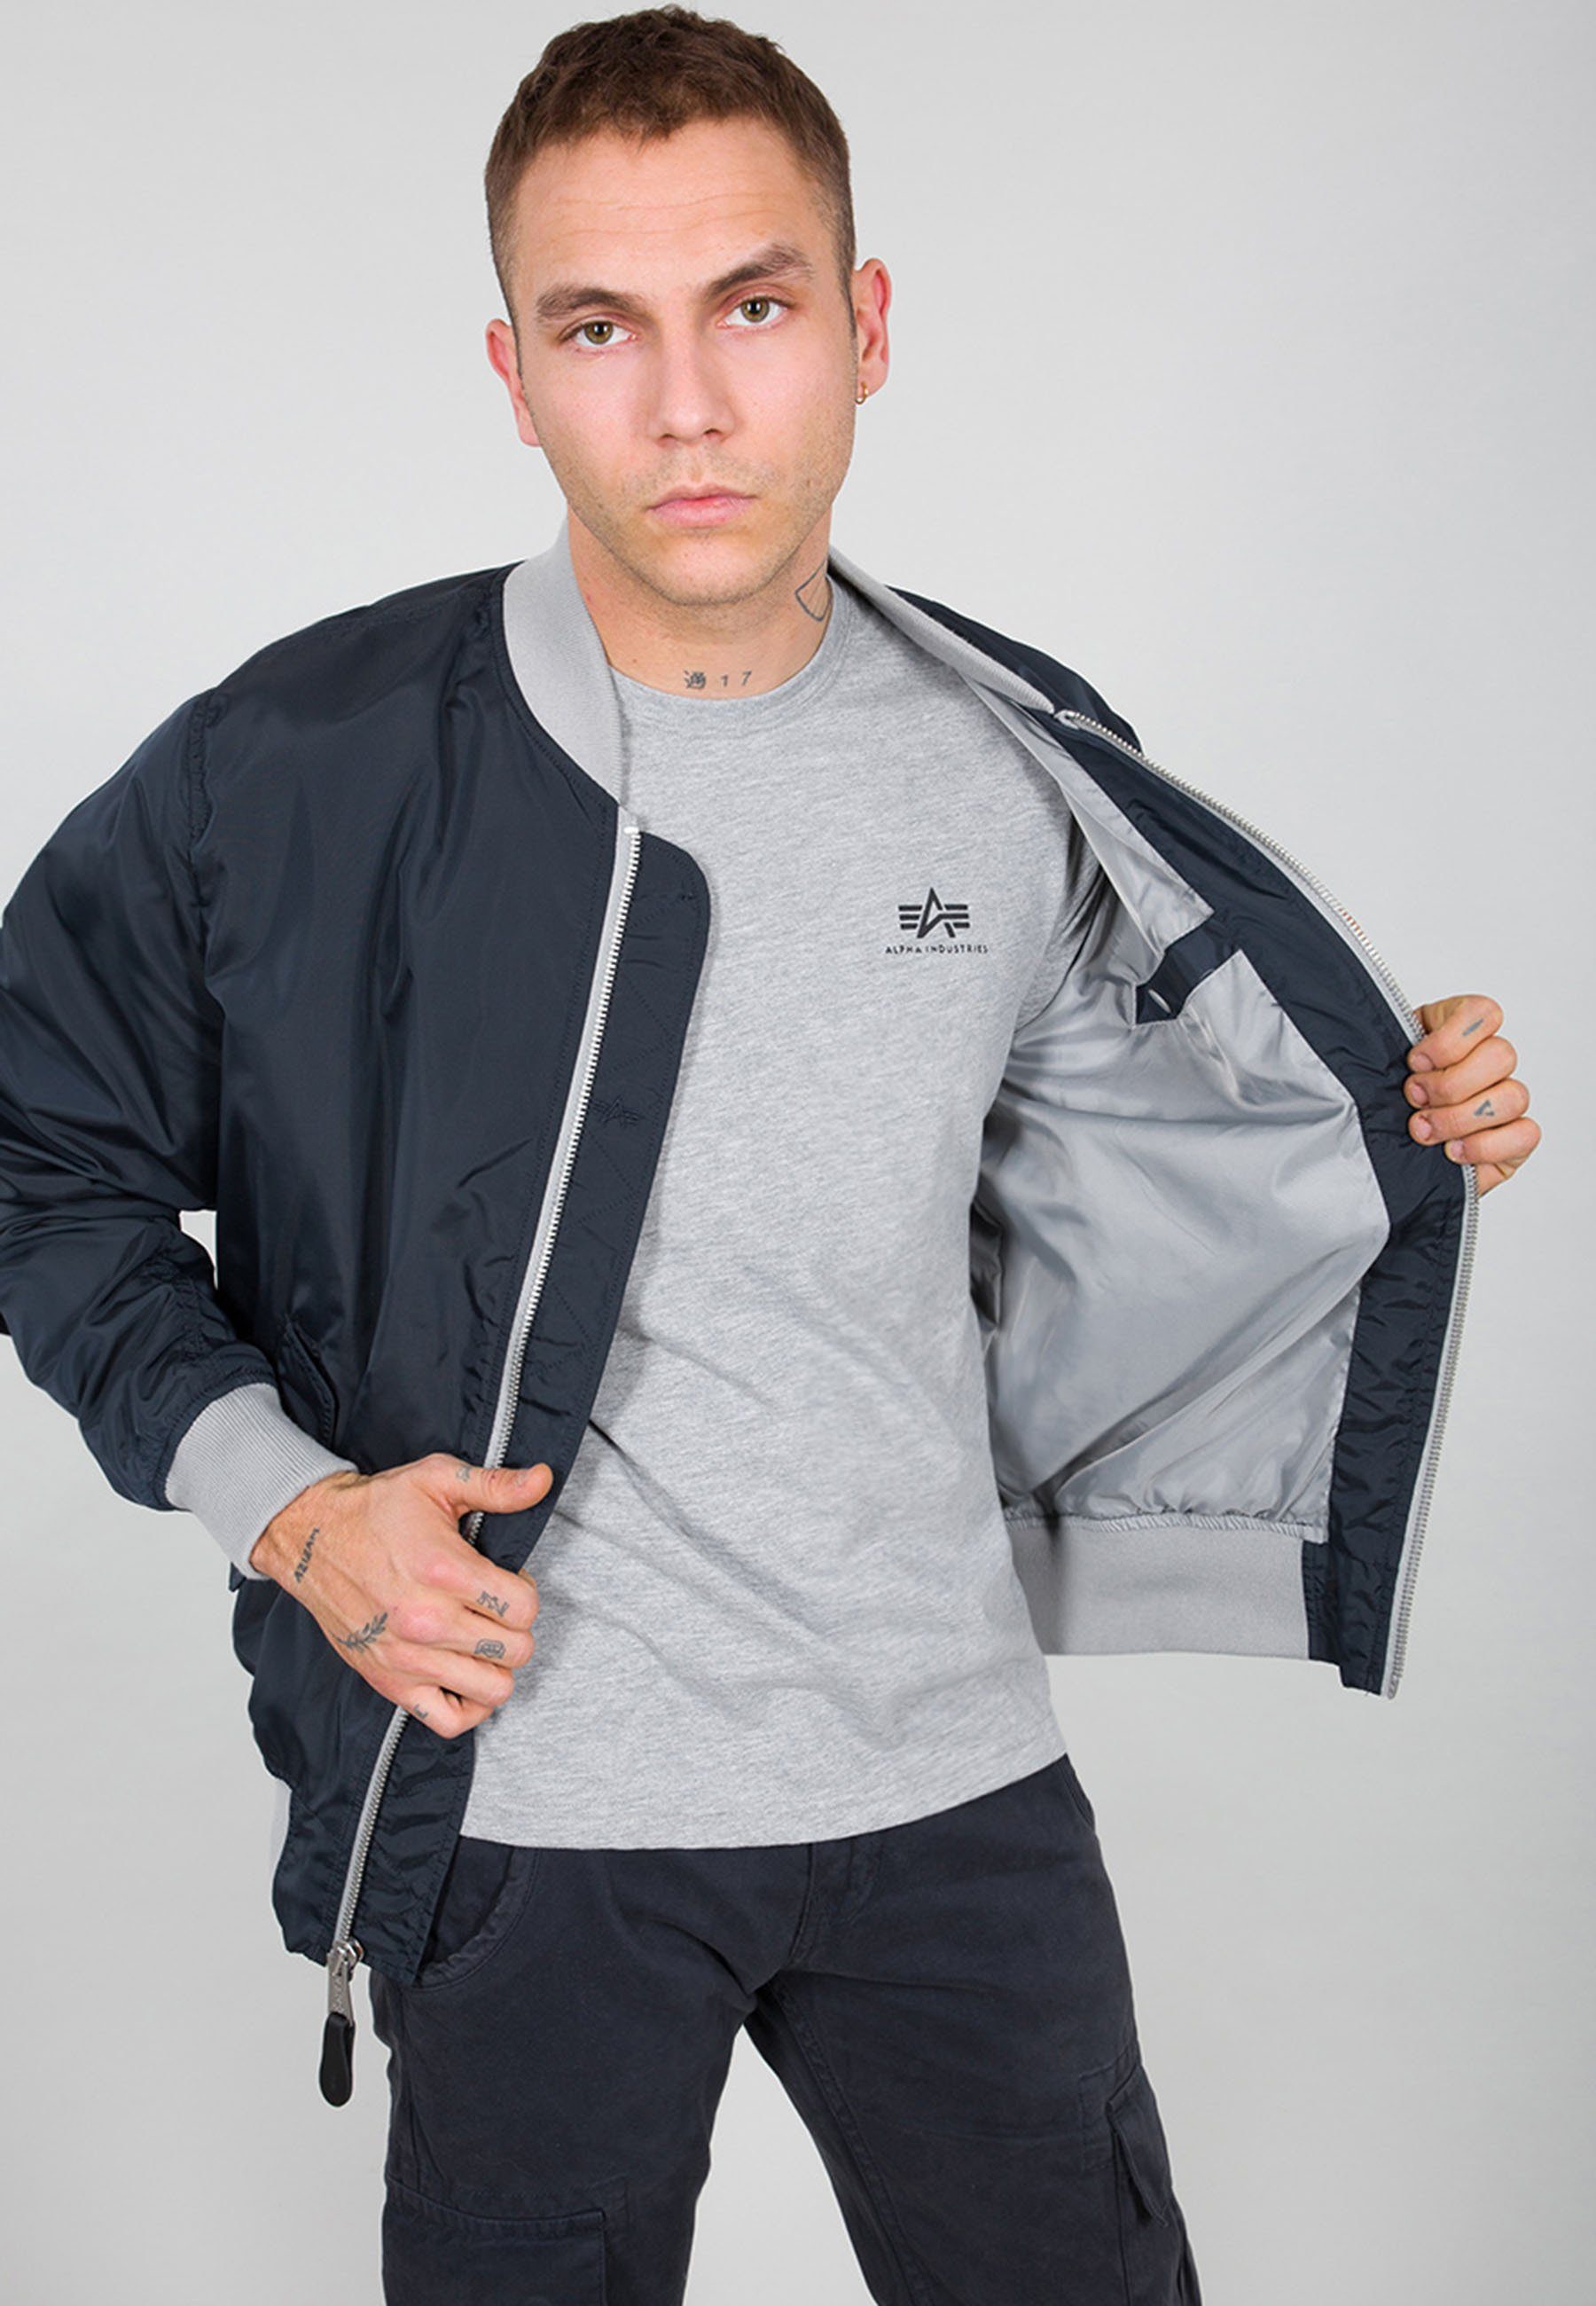 Alpha Industries rep.blue Jackets Bomber Flight Alpha MA-1 Industries TTC - Bomberjacke & Men